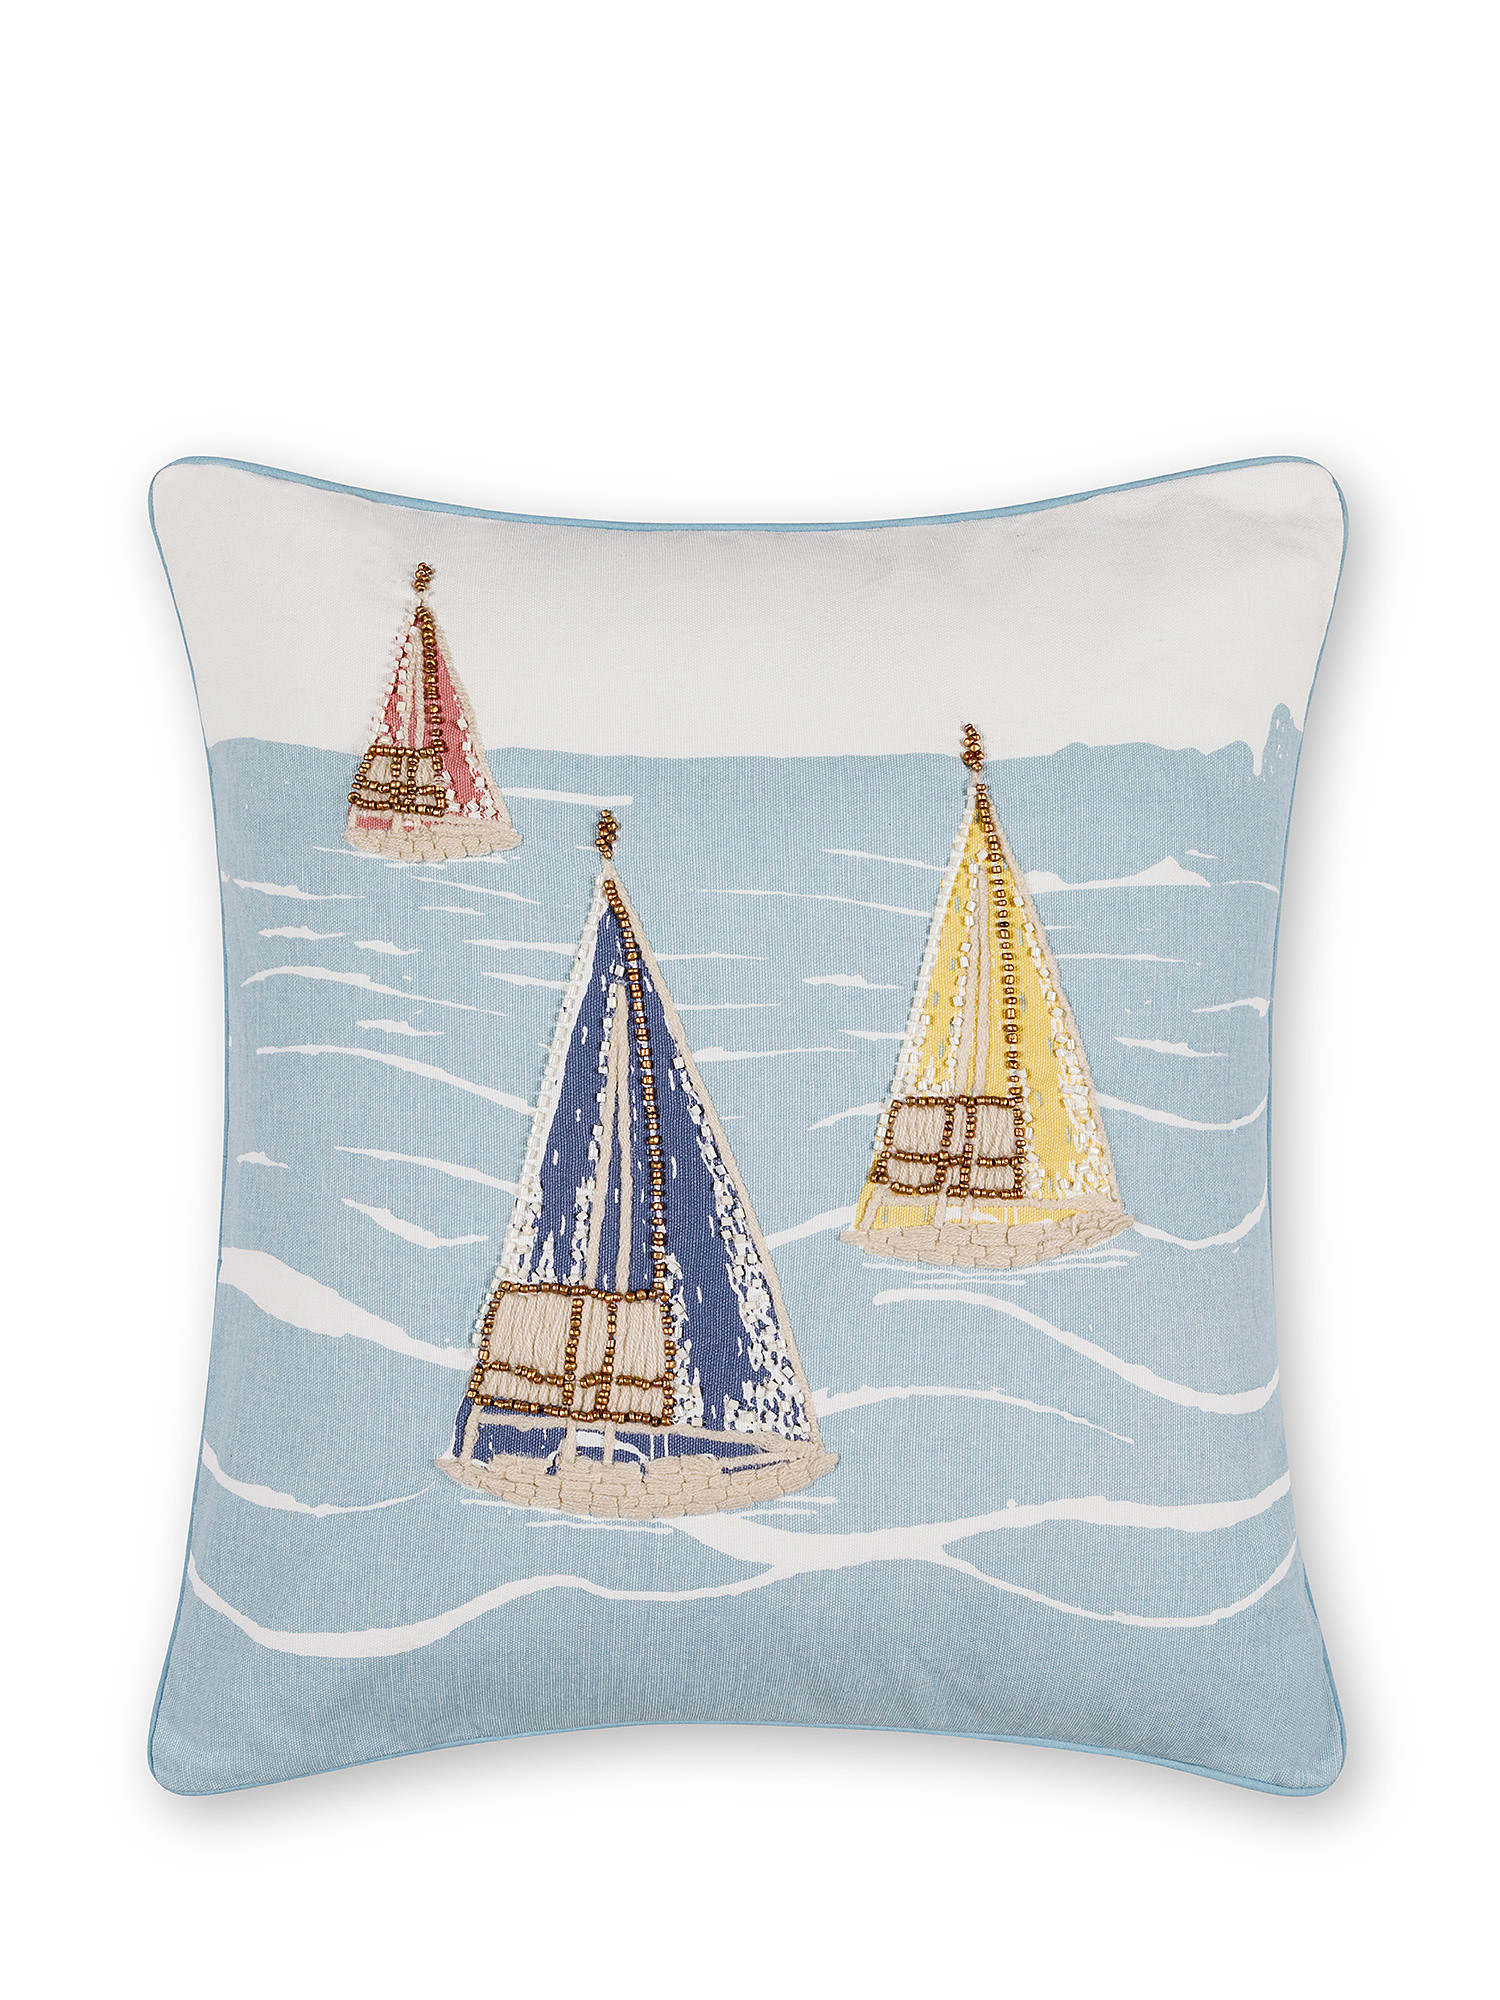 Marine embroidery cushion 45x45cm, Multicolor, large image number 0